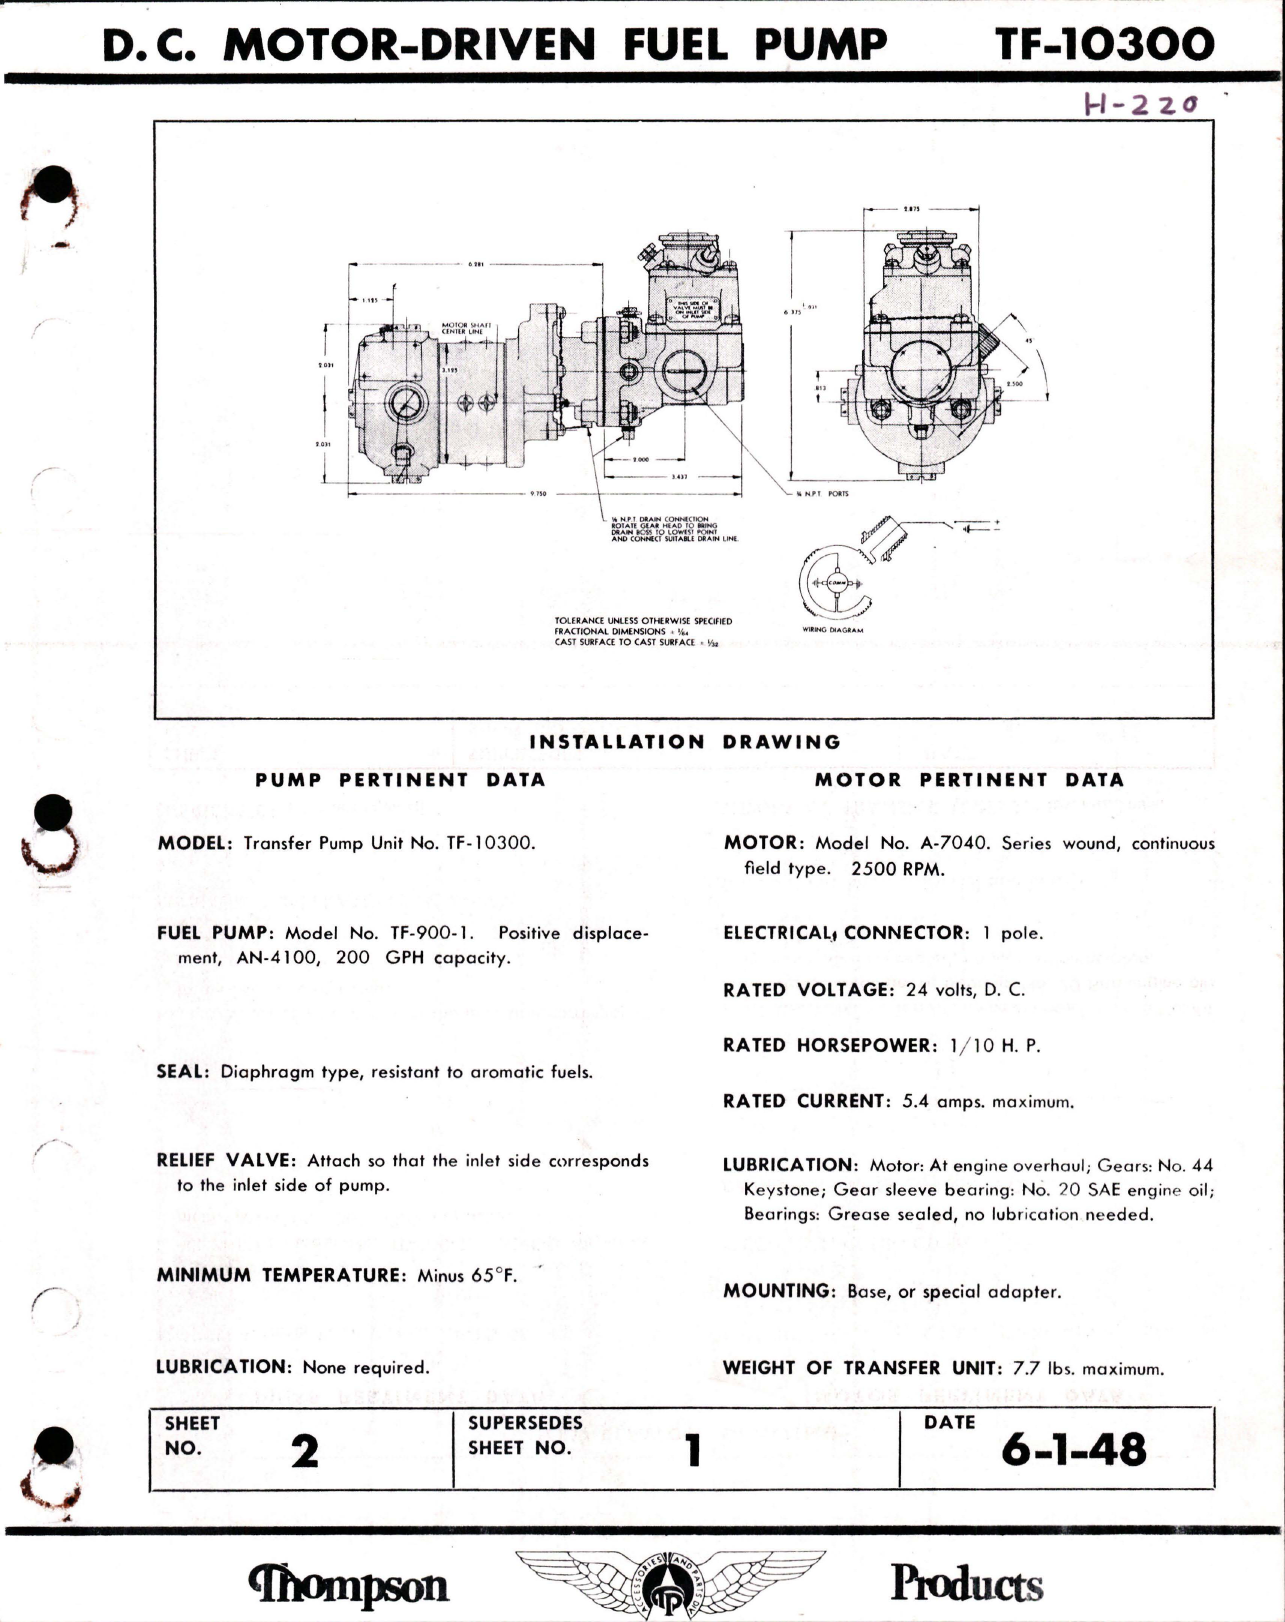 Sample page 1 from AirCorps Library document: Installation Drawing for DC Motor Driven Fuel Pump - TF-10300